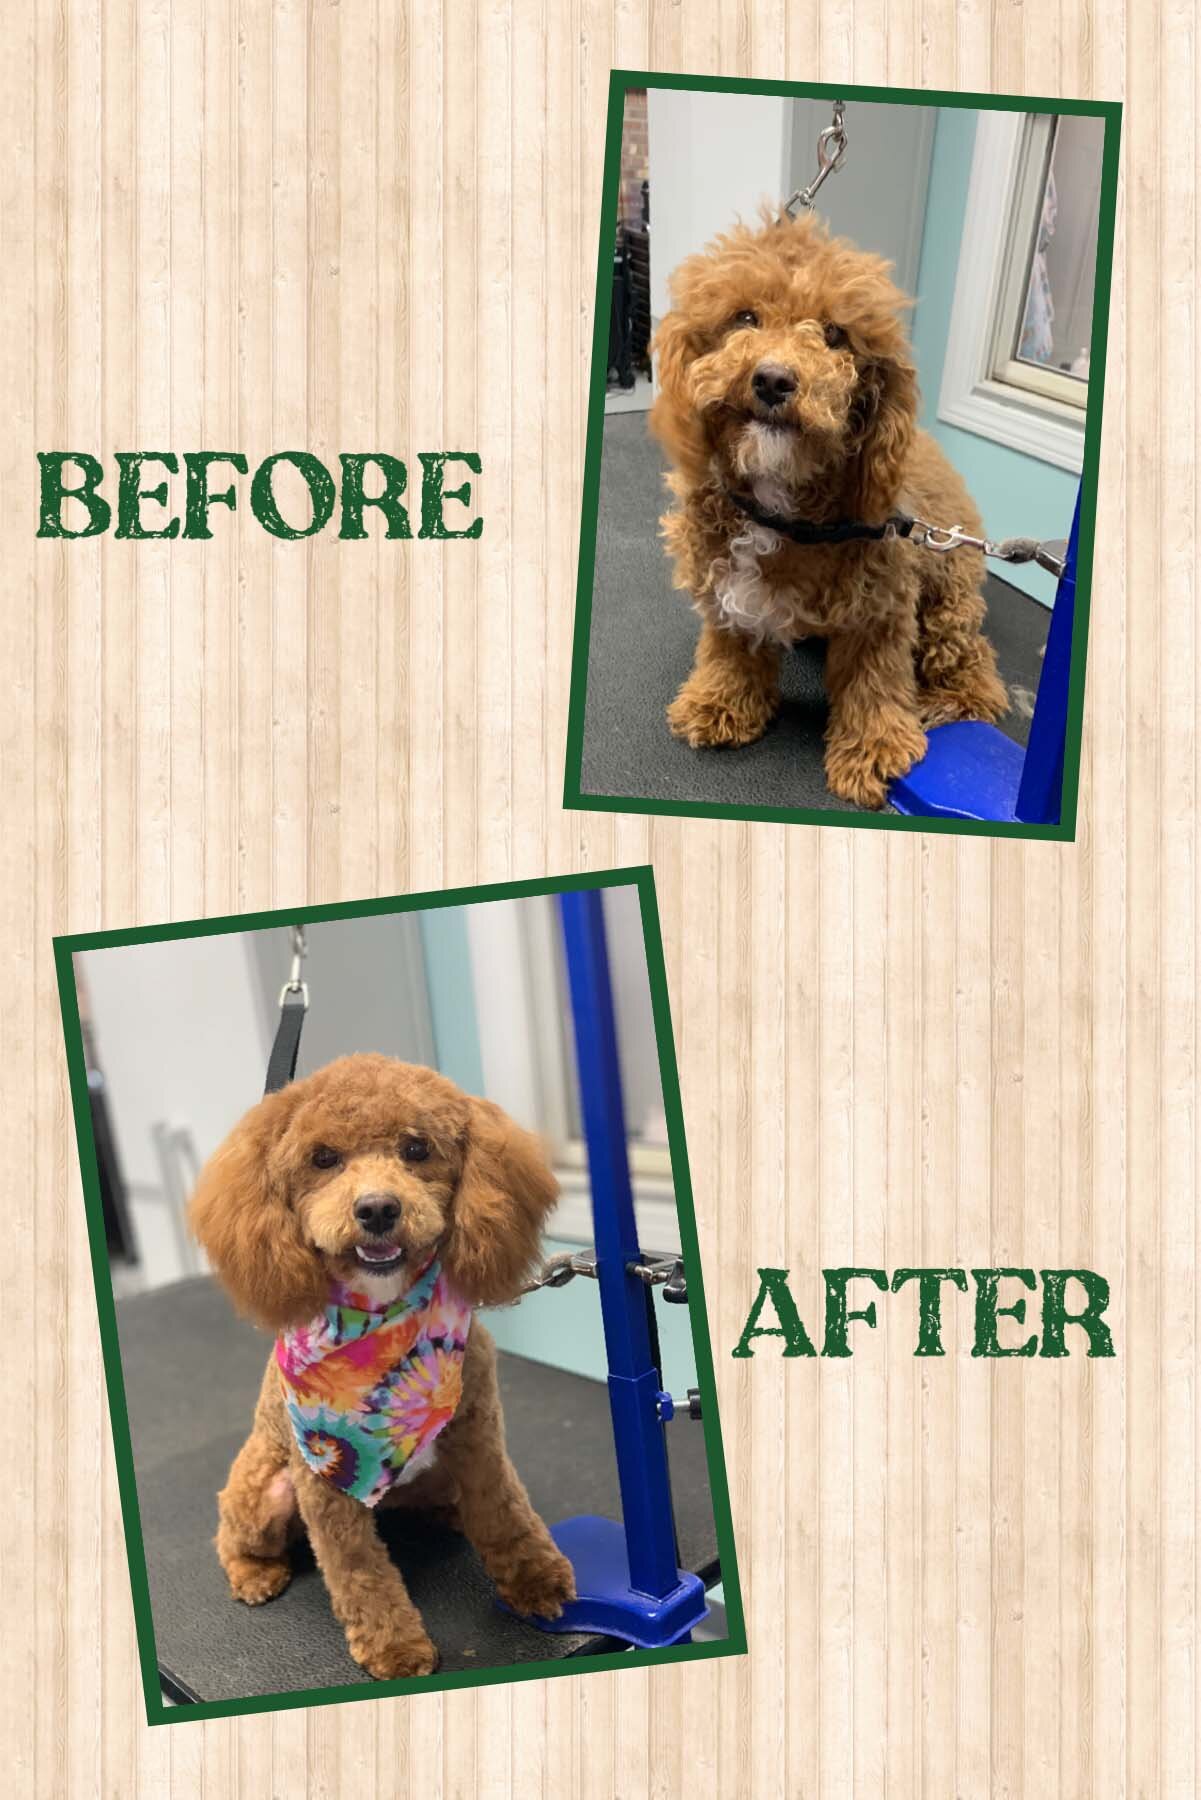 Penny's before and after photos!